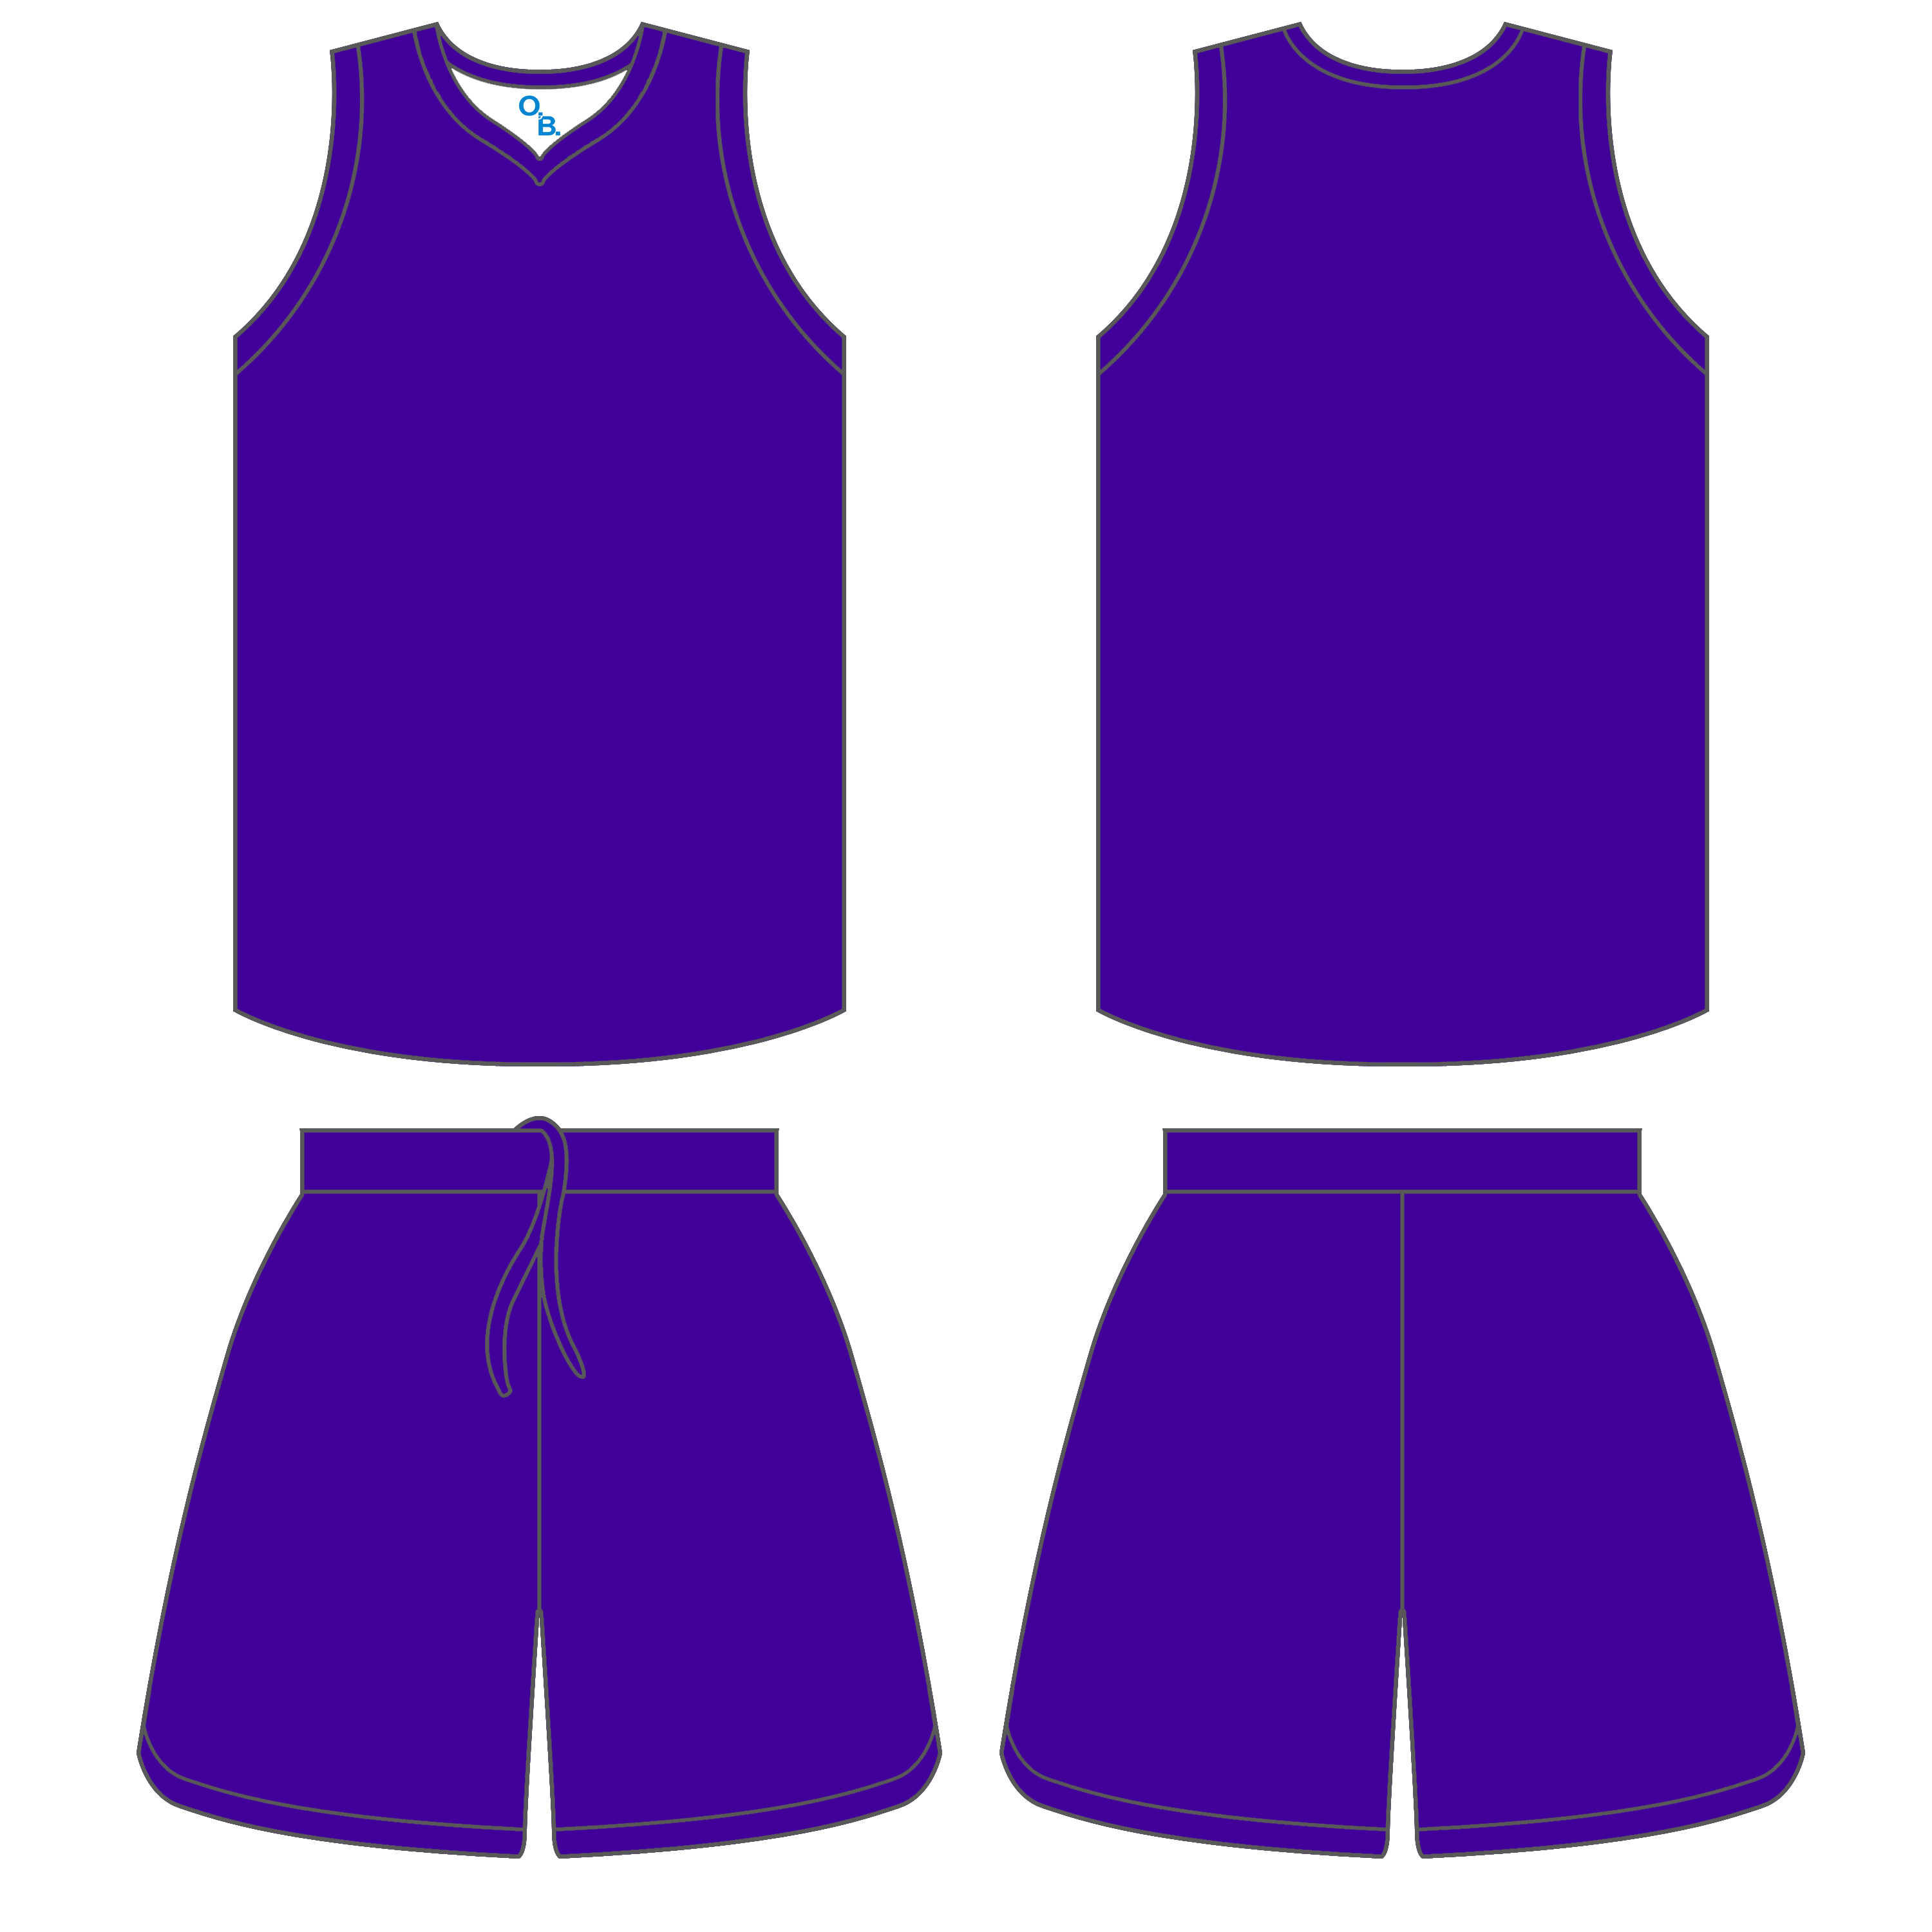 blank-basketball-jersey-cliparts-co